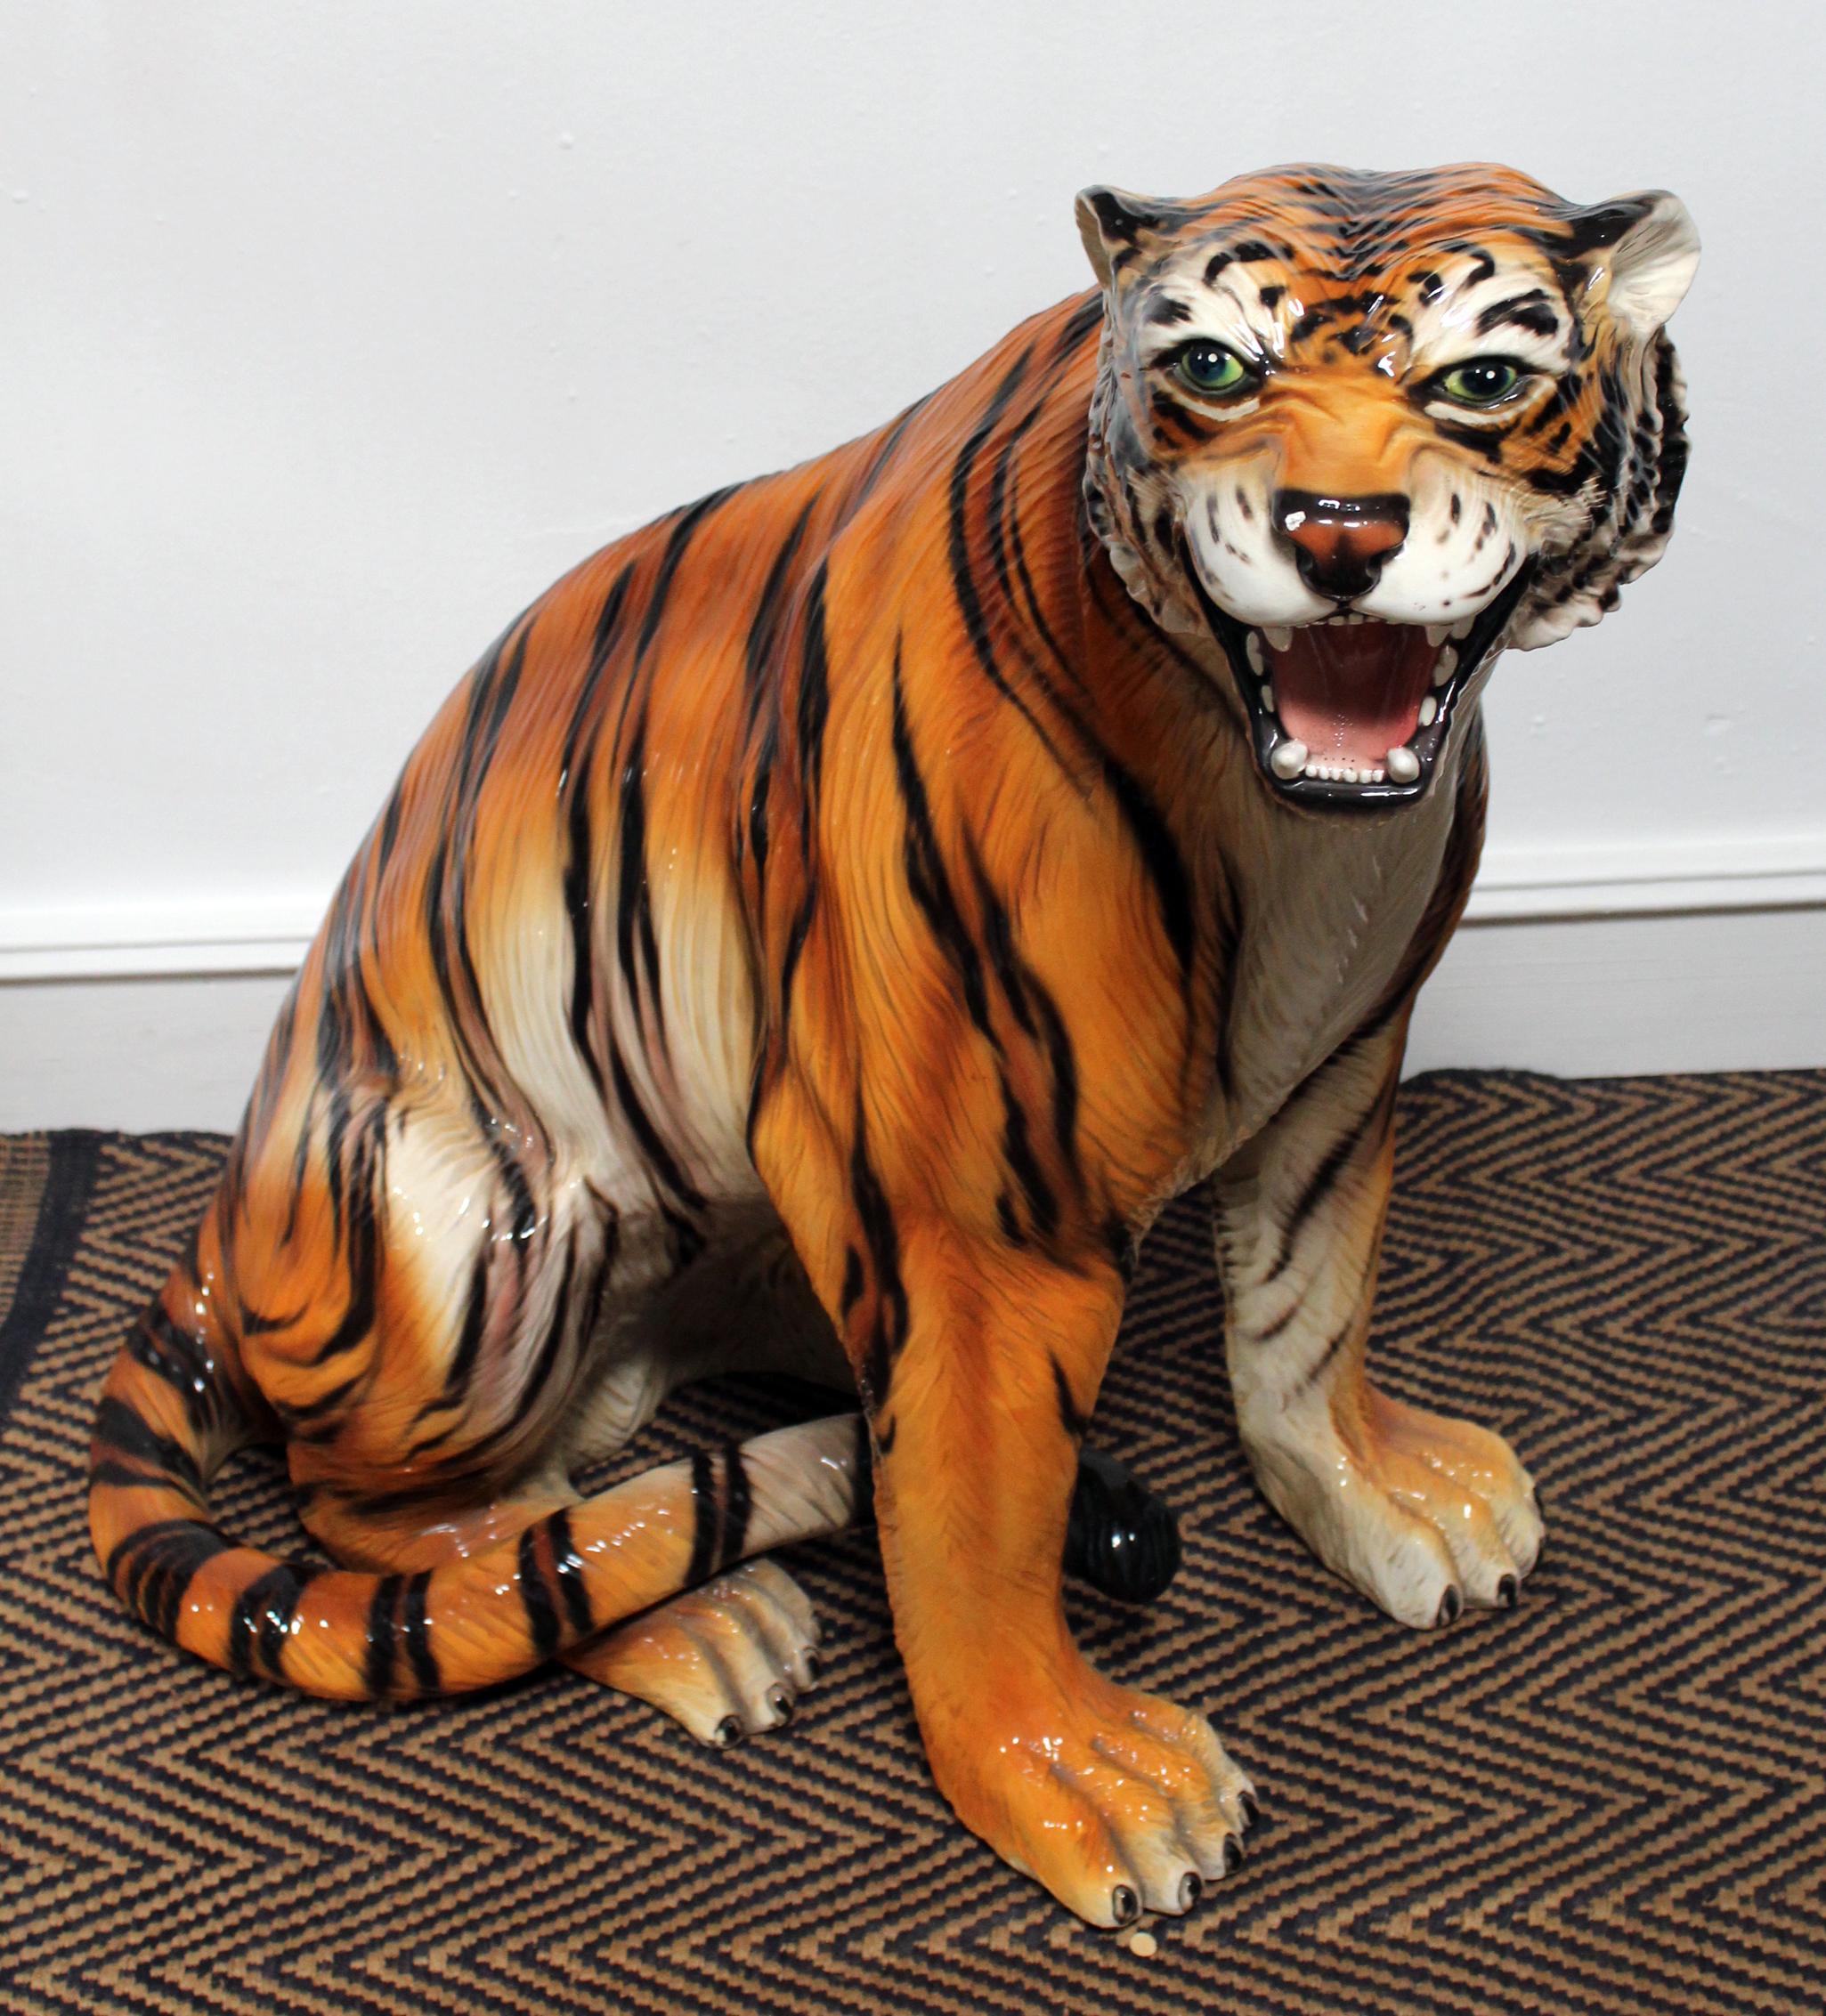 1980s Spanish Hand Painted Glazed Ceramic Tiger Sculpture For Sale 2